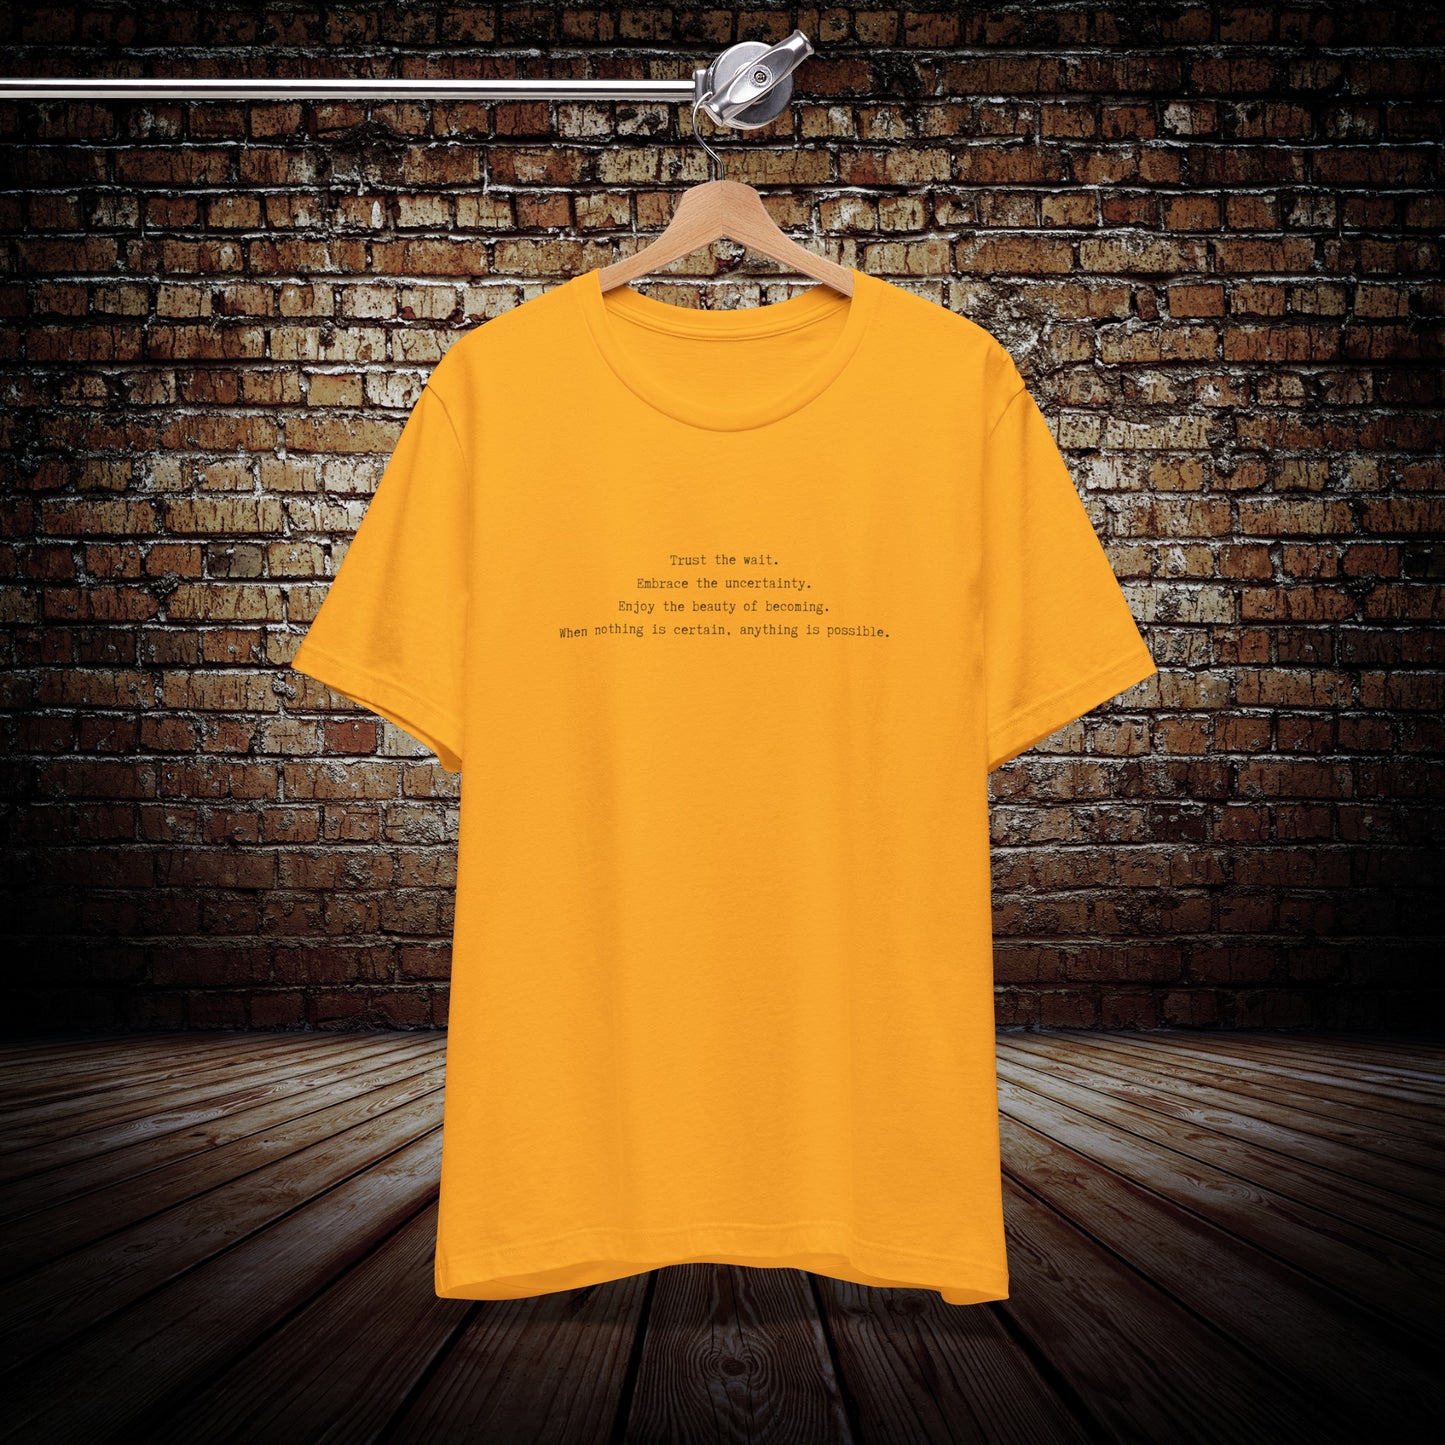 Anything is possible motivational t-shirt